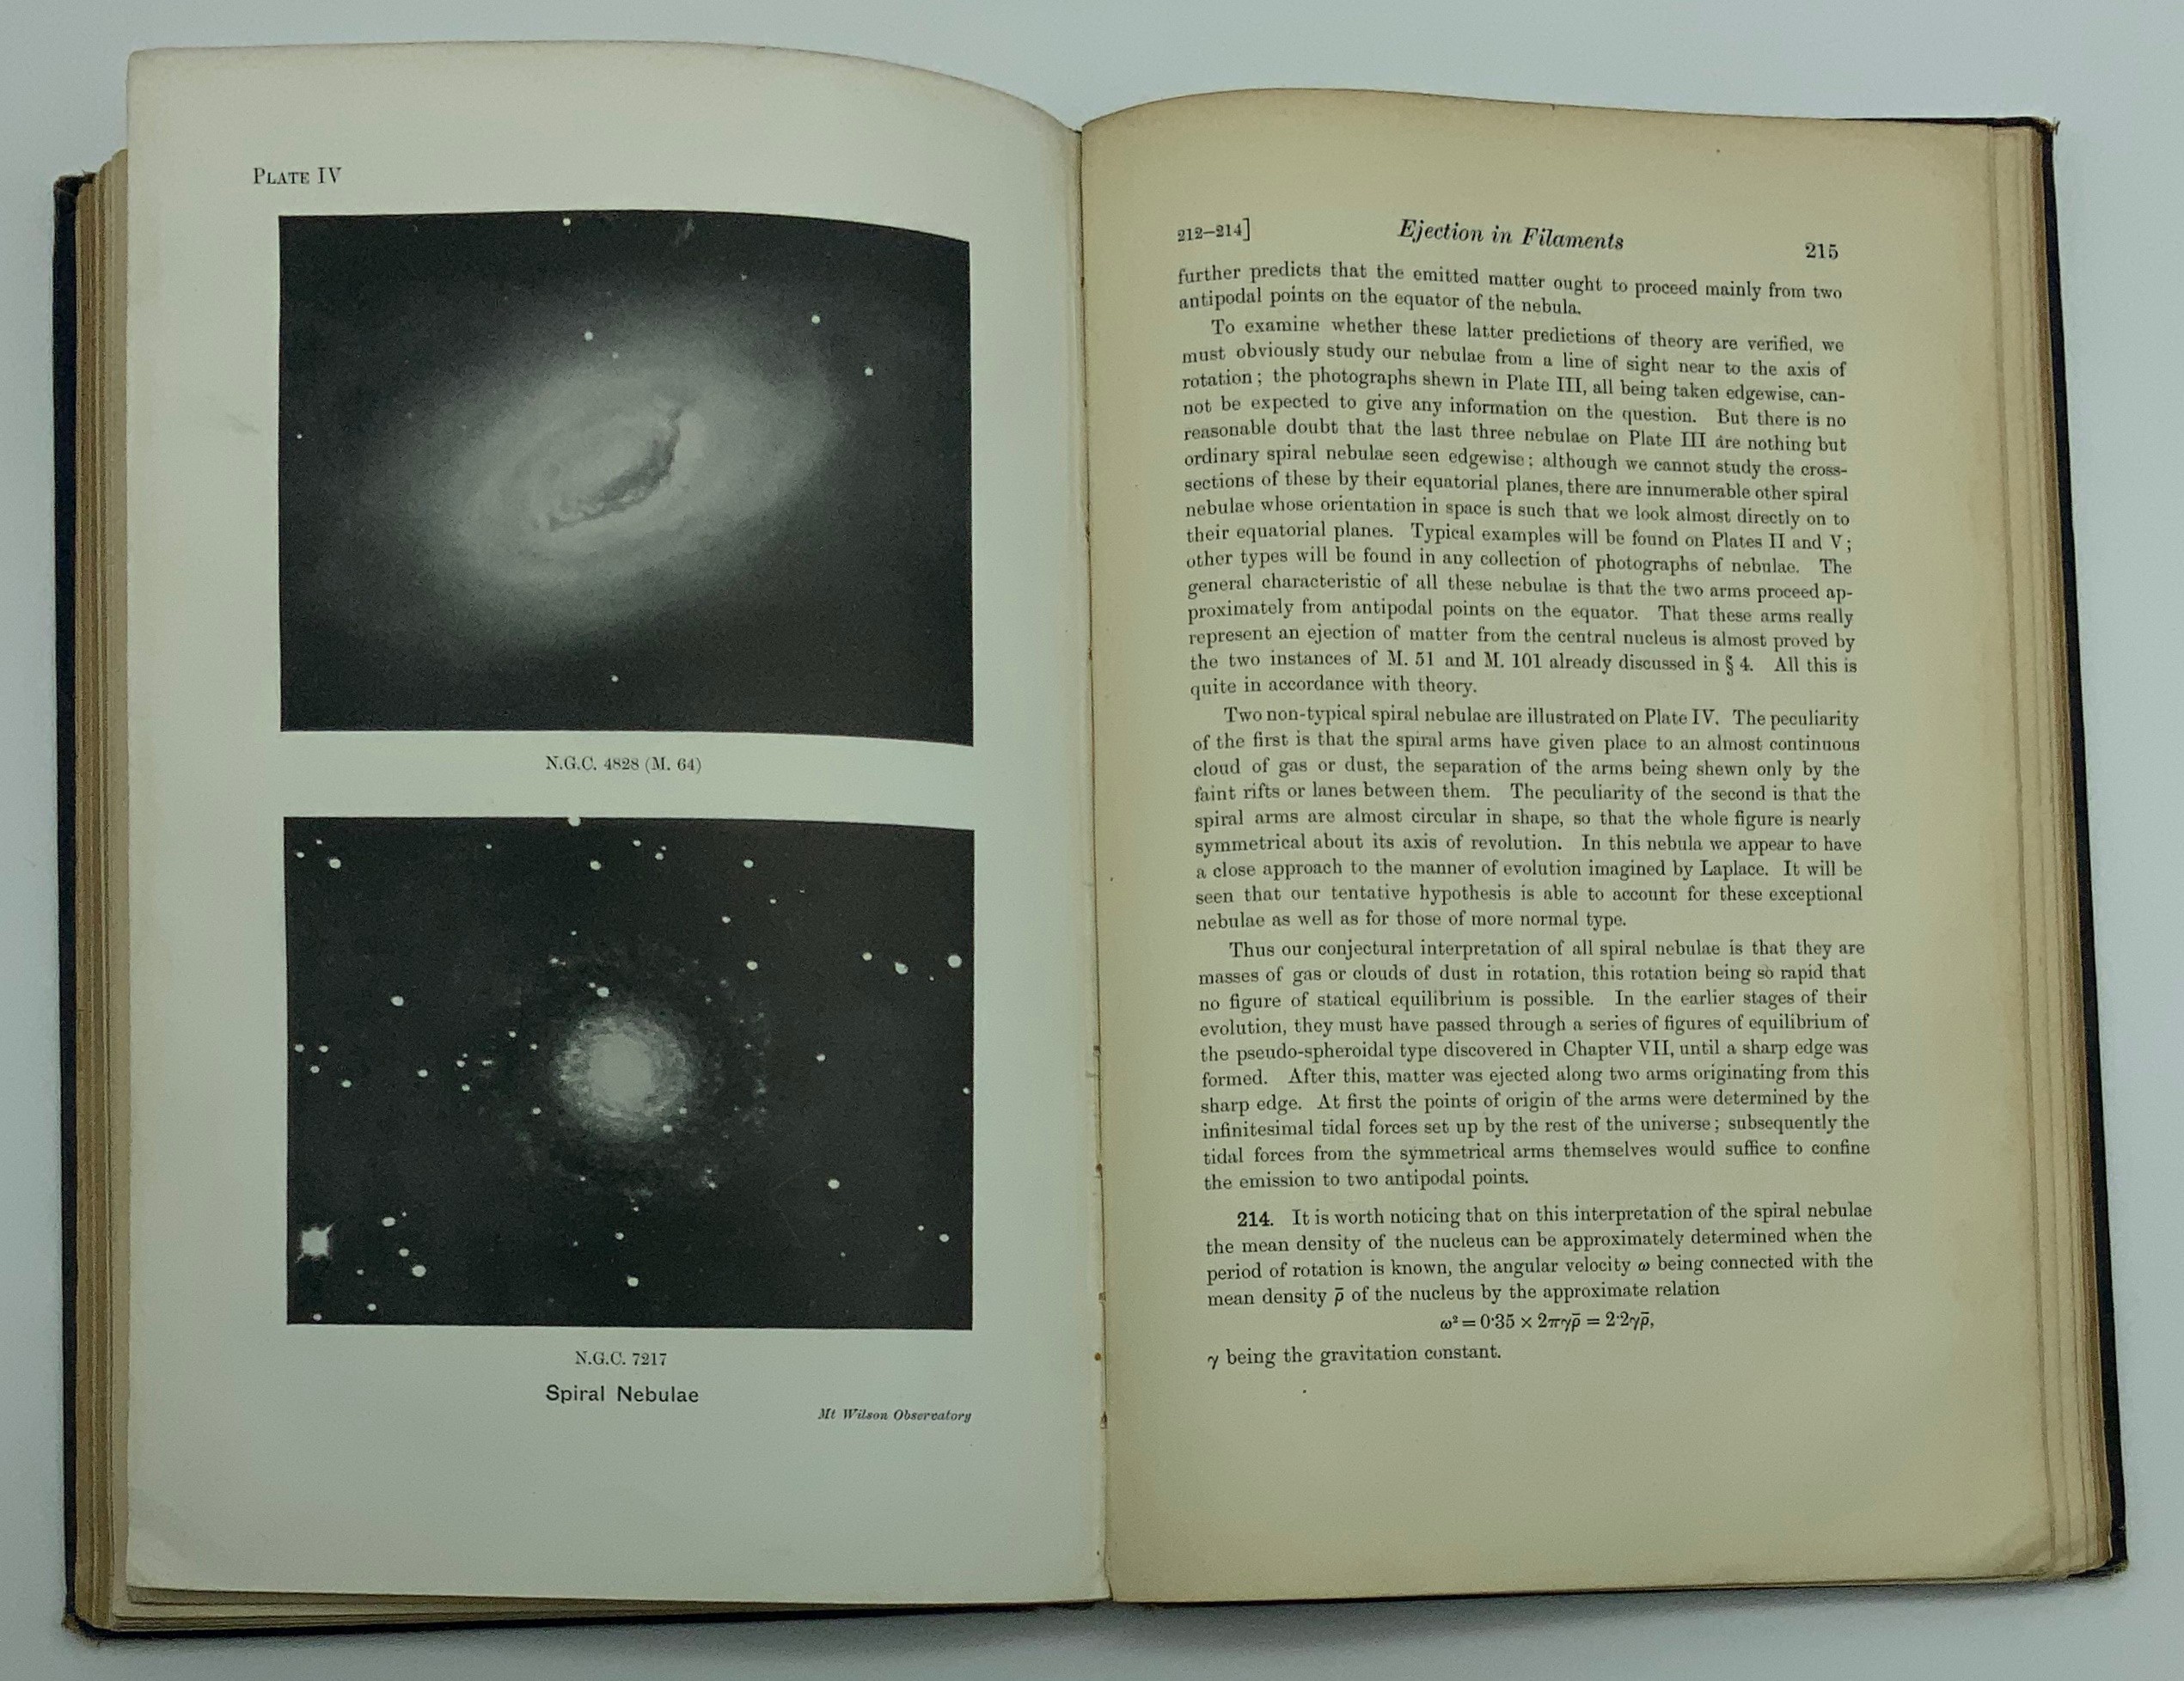 1919 PROBLEMS OF COSMOGONY AND STELLAR DYNAMICS by J. H. JEANS - Image 4 of 4